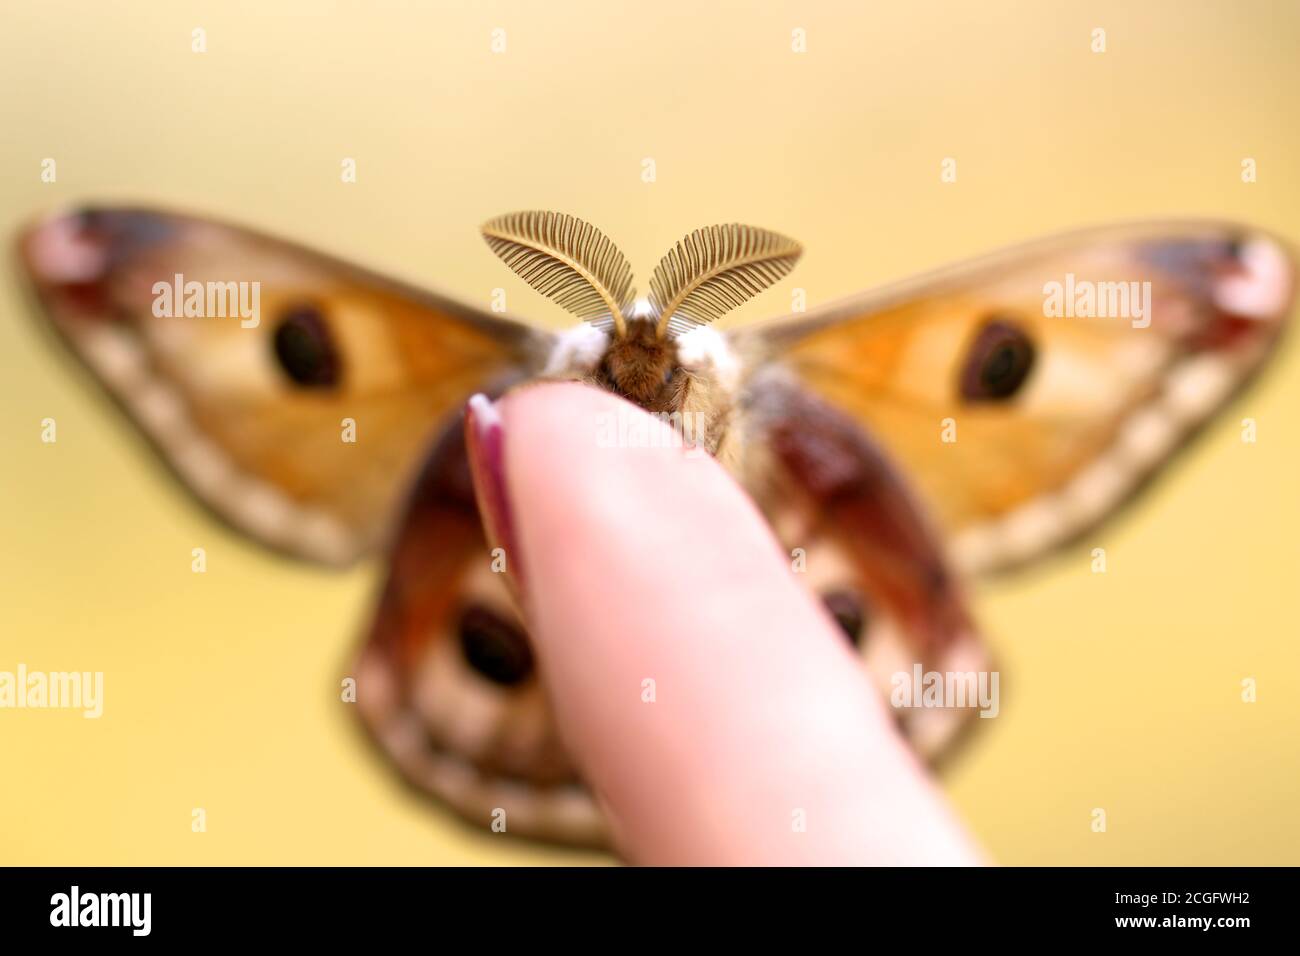 Small Saturnia Pavoniella Emperor Moth brown butterfly over the finger with her big antennae. After one year of sleep in the cocoone,it is ready to fly for her last few days of life. Stock Photo